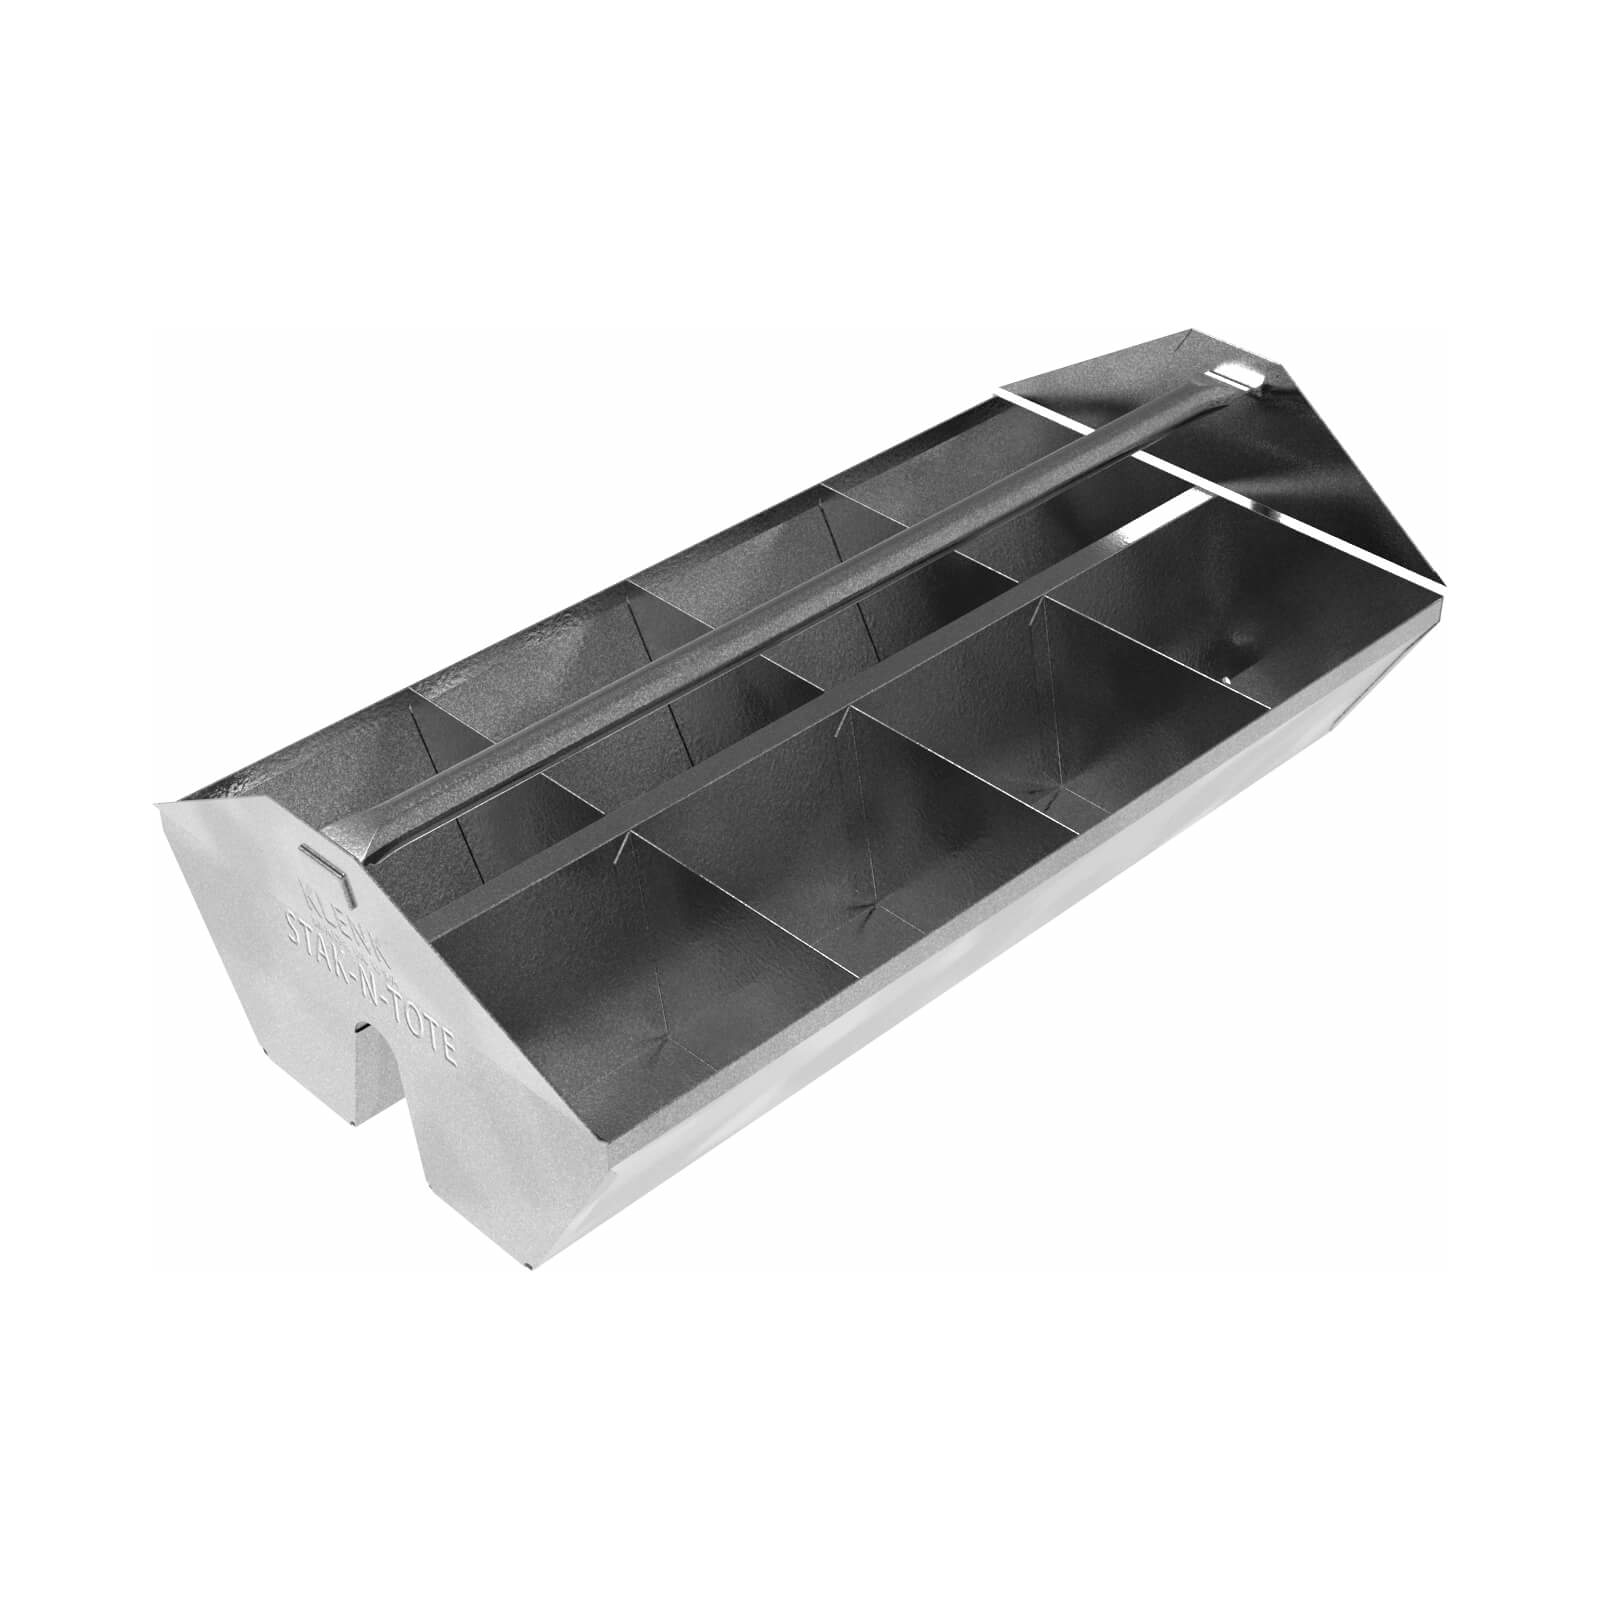 MB78010 Klenk Stak-n-tote Fittings Tote Tray 8 Compartment for sale online 